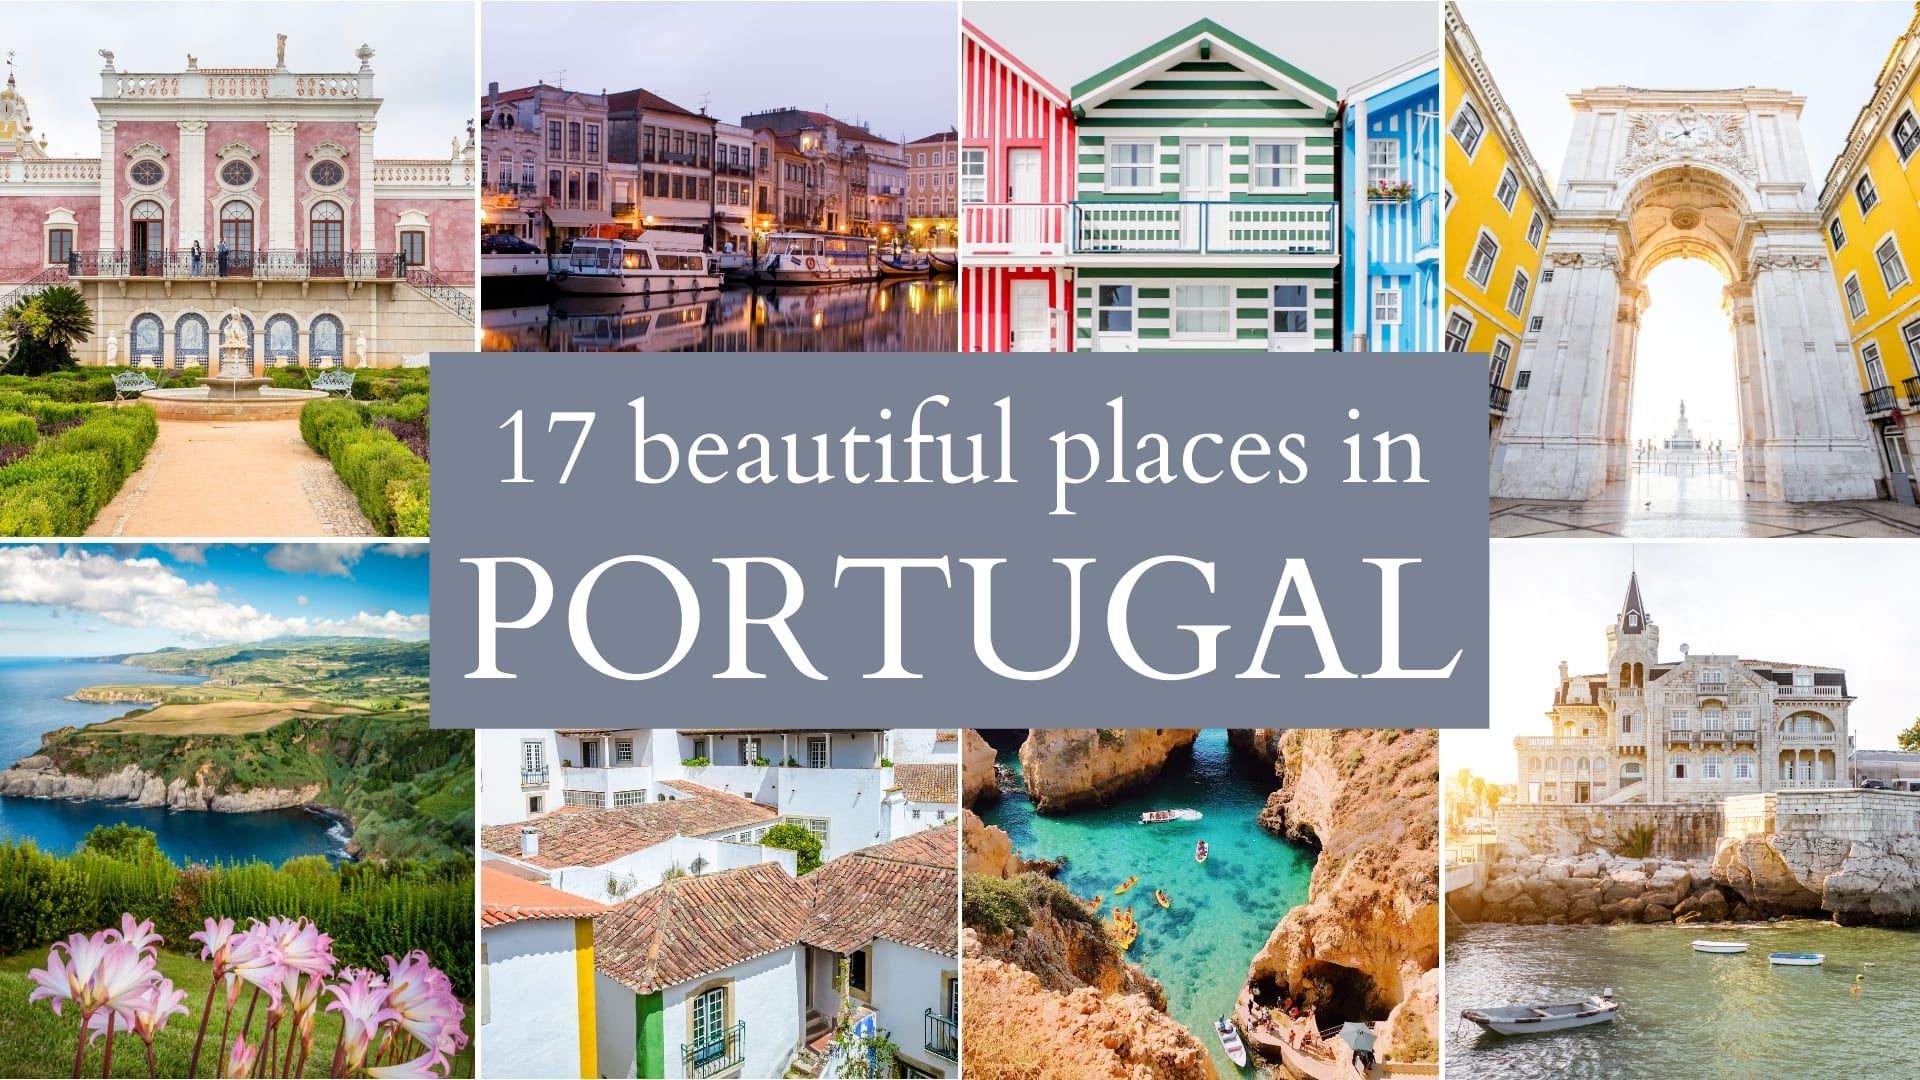 Guvernør blæse hul dollar 22 Most Beautiful Places in Portugal: The Ultimate List